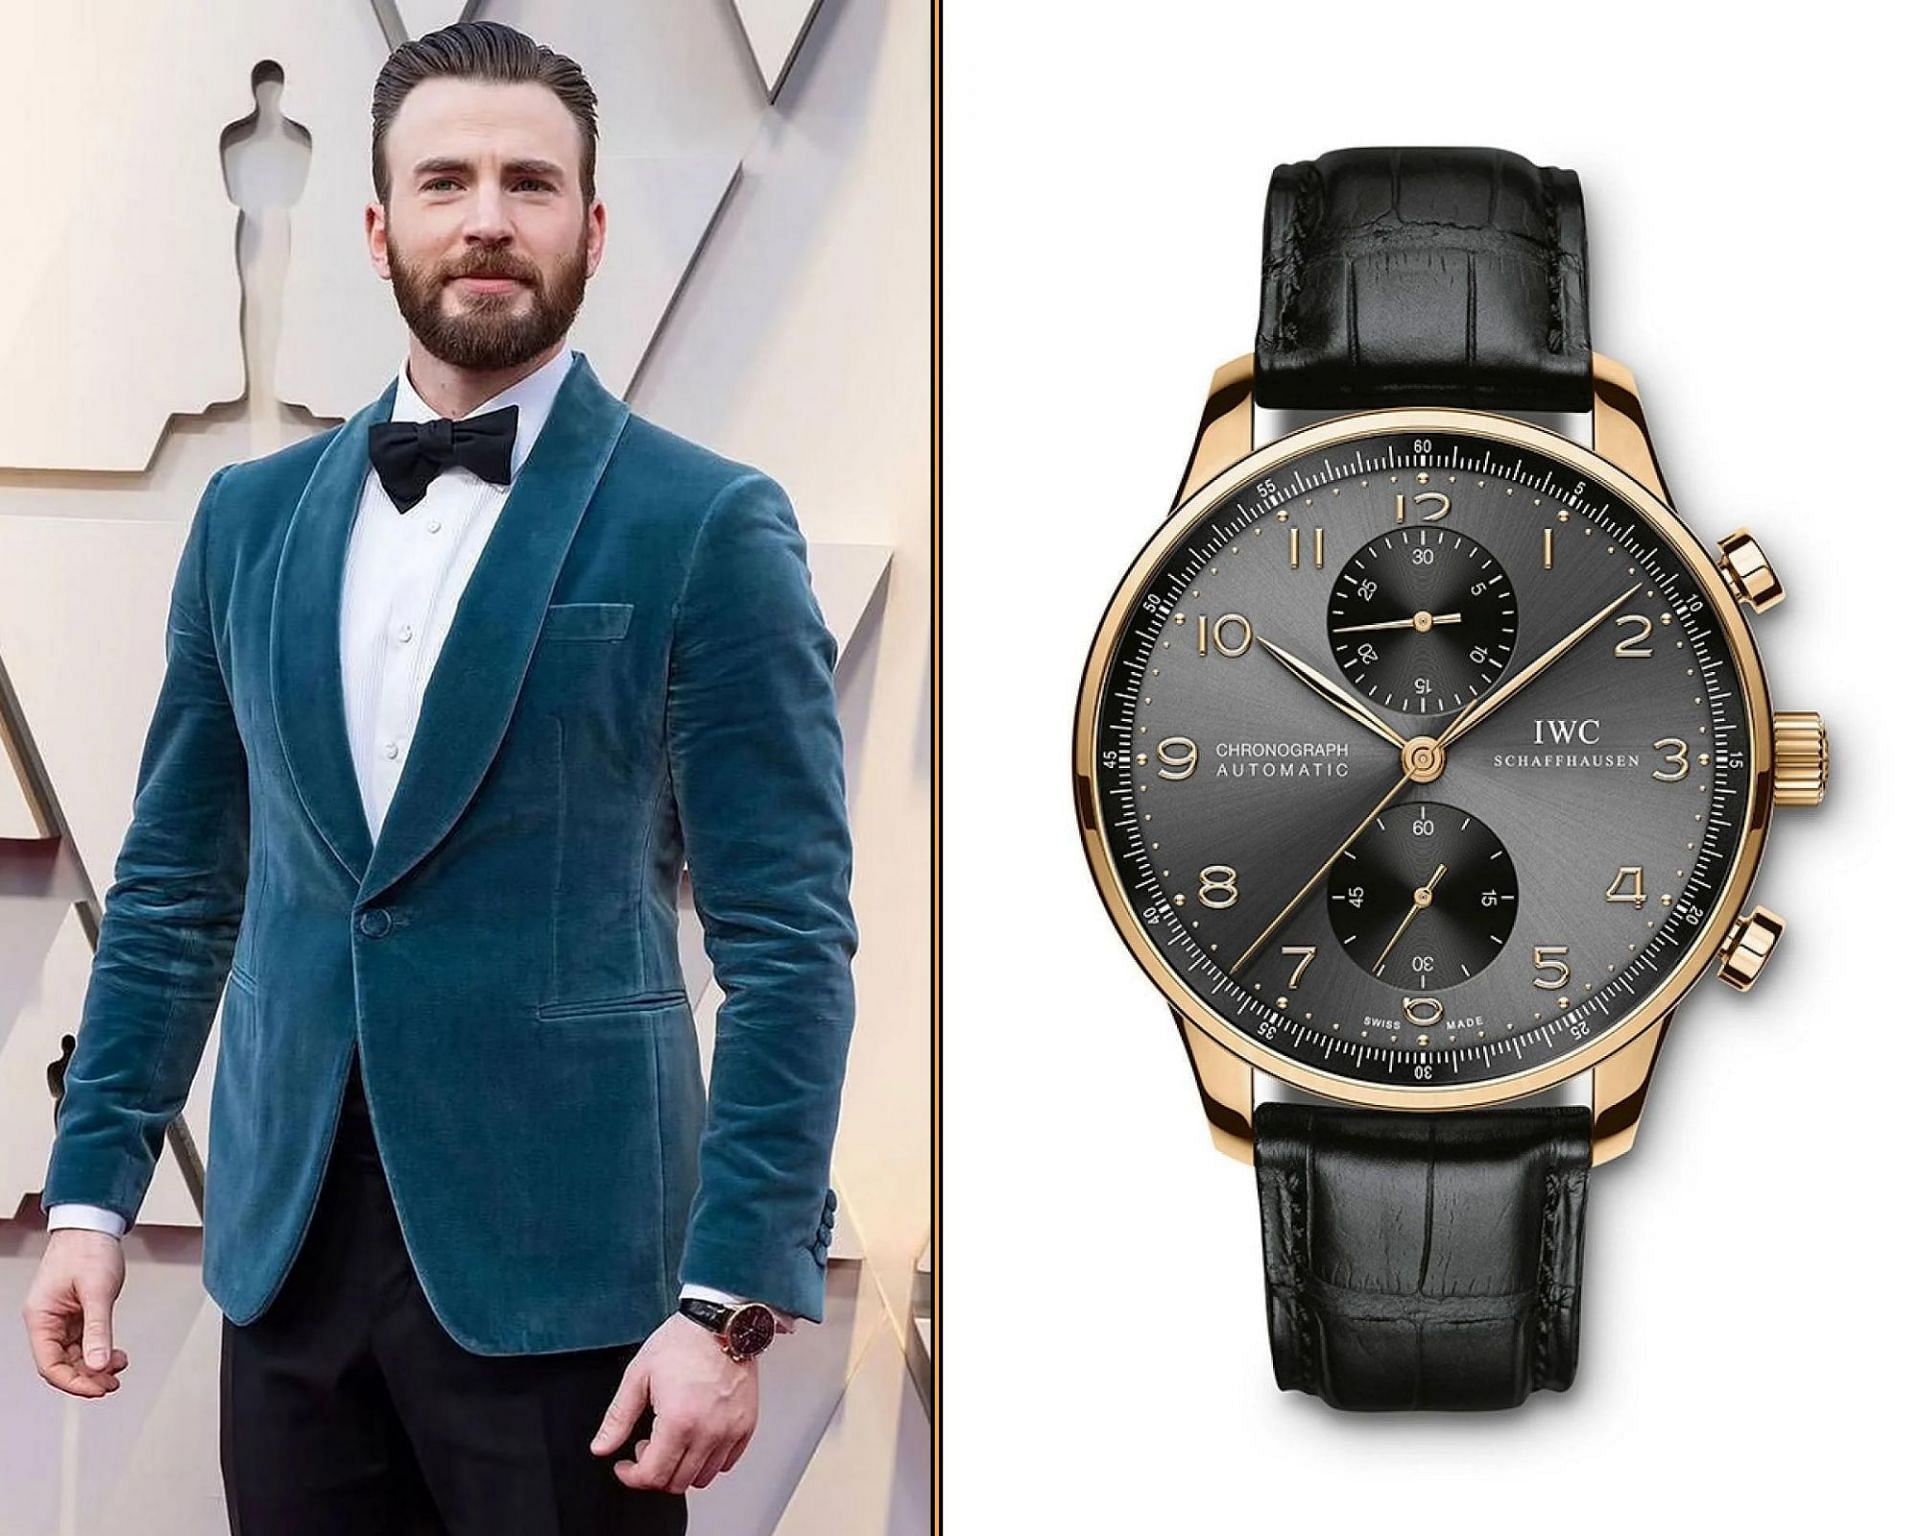 Chris Evans at the 2020 Academy Awards sporting his IWC Portugieser Chronograph (Image via Getty)